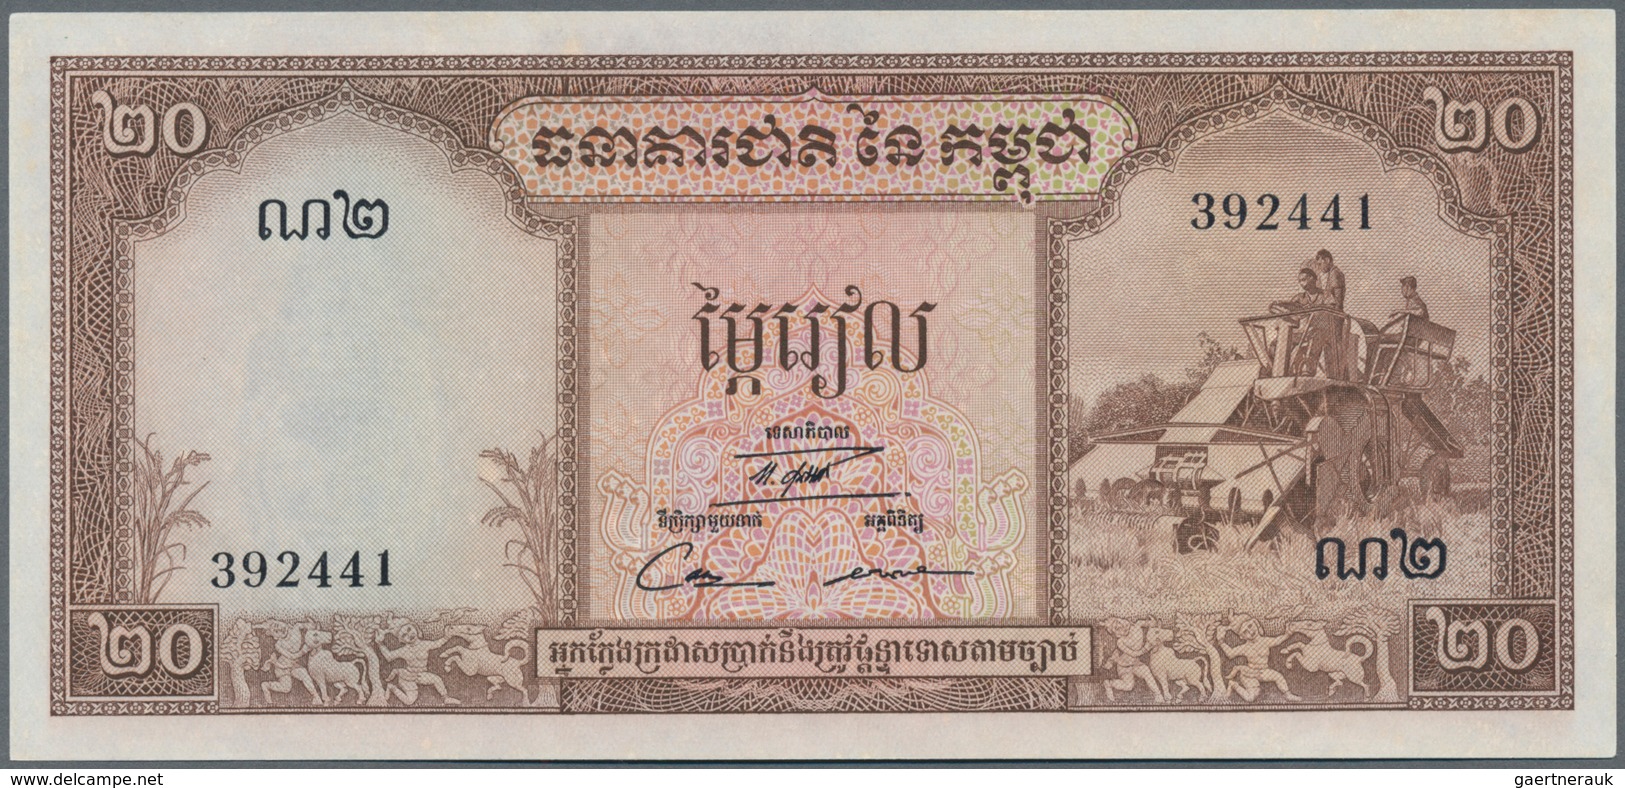 Alle Welt: Huge lot with 850 banknotes from all over the world with some duplicates, comprising for